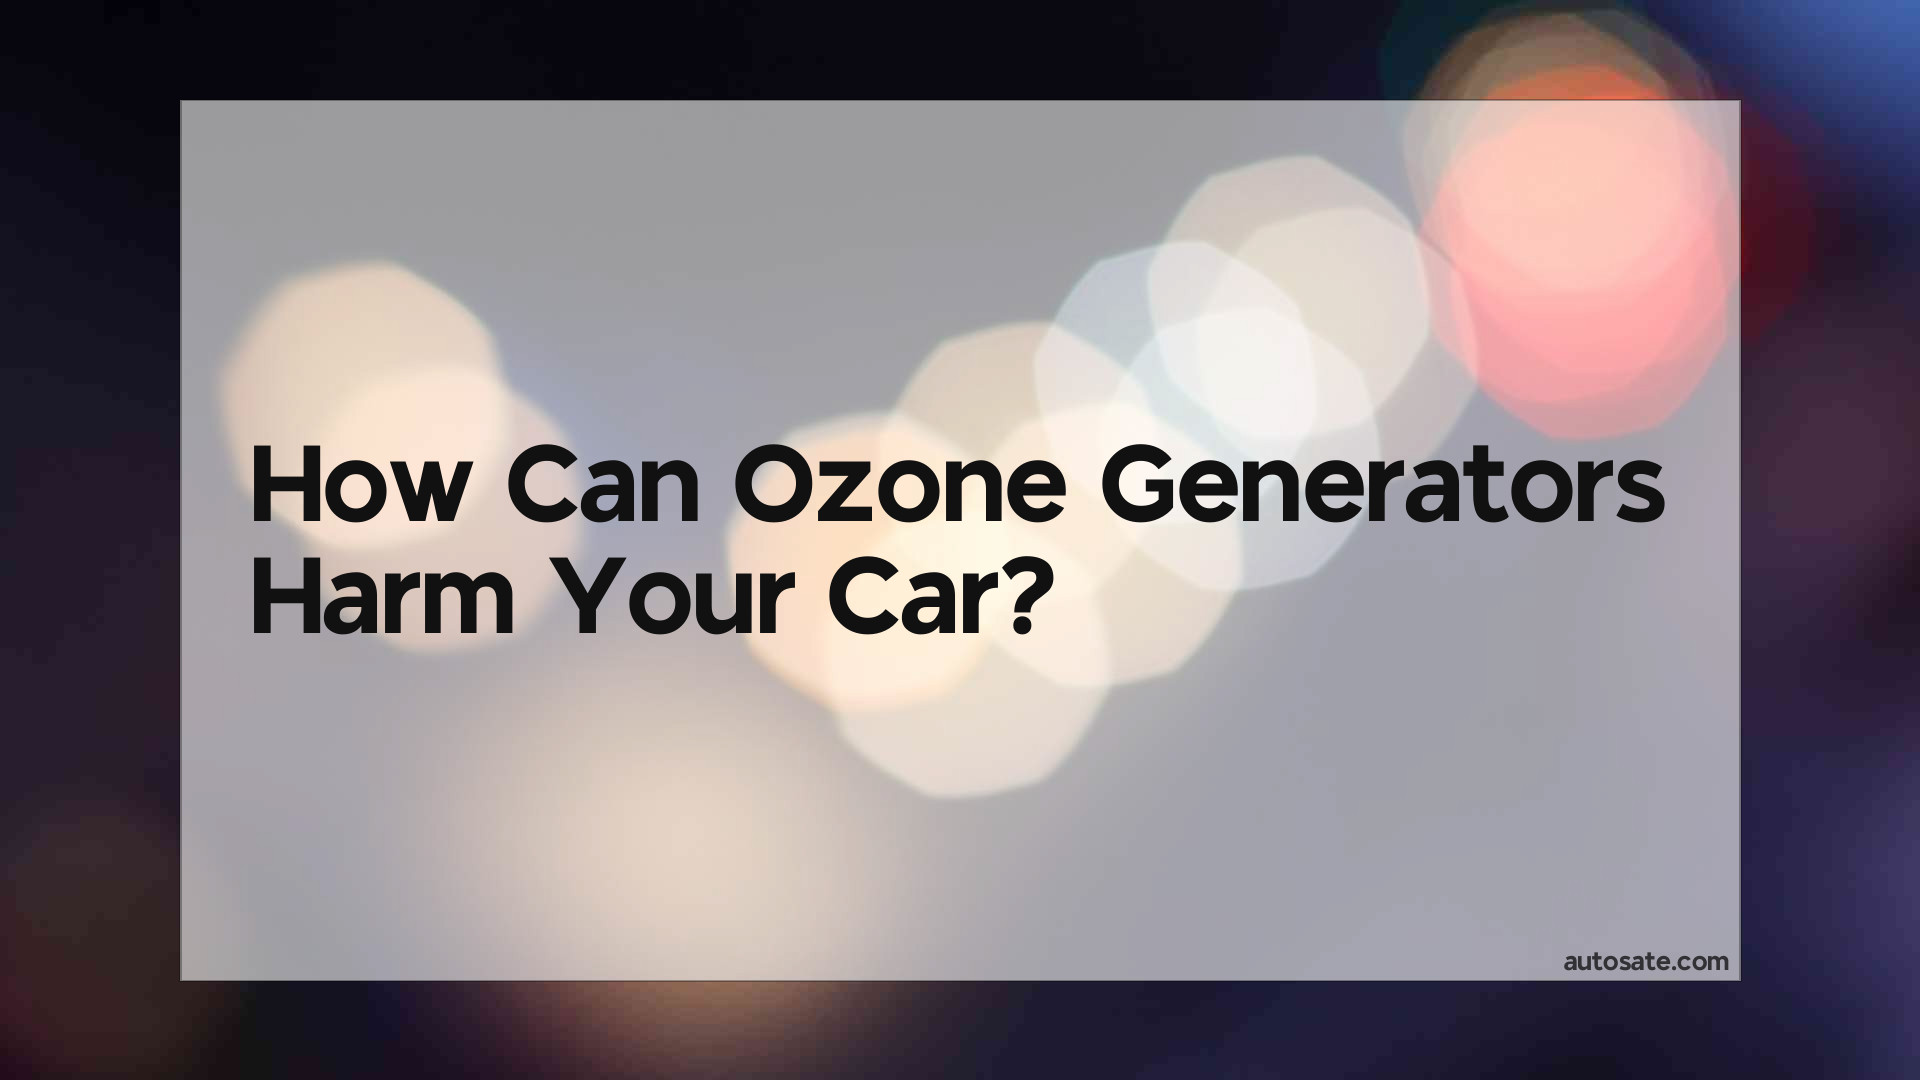 Can Ozone Generators Harm Your Car